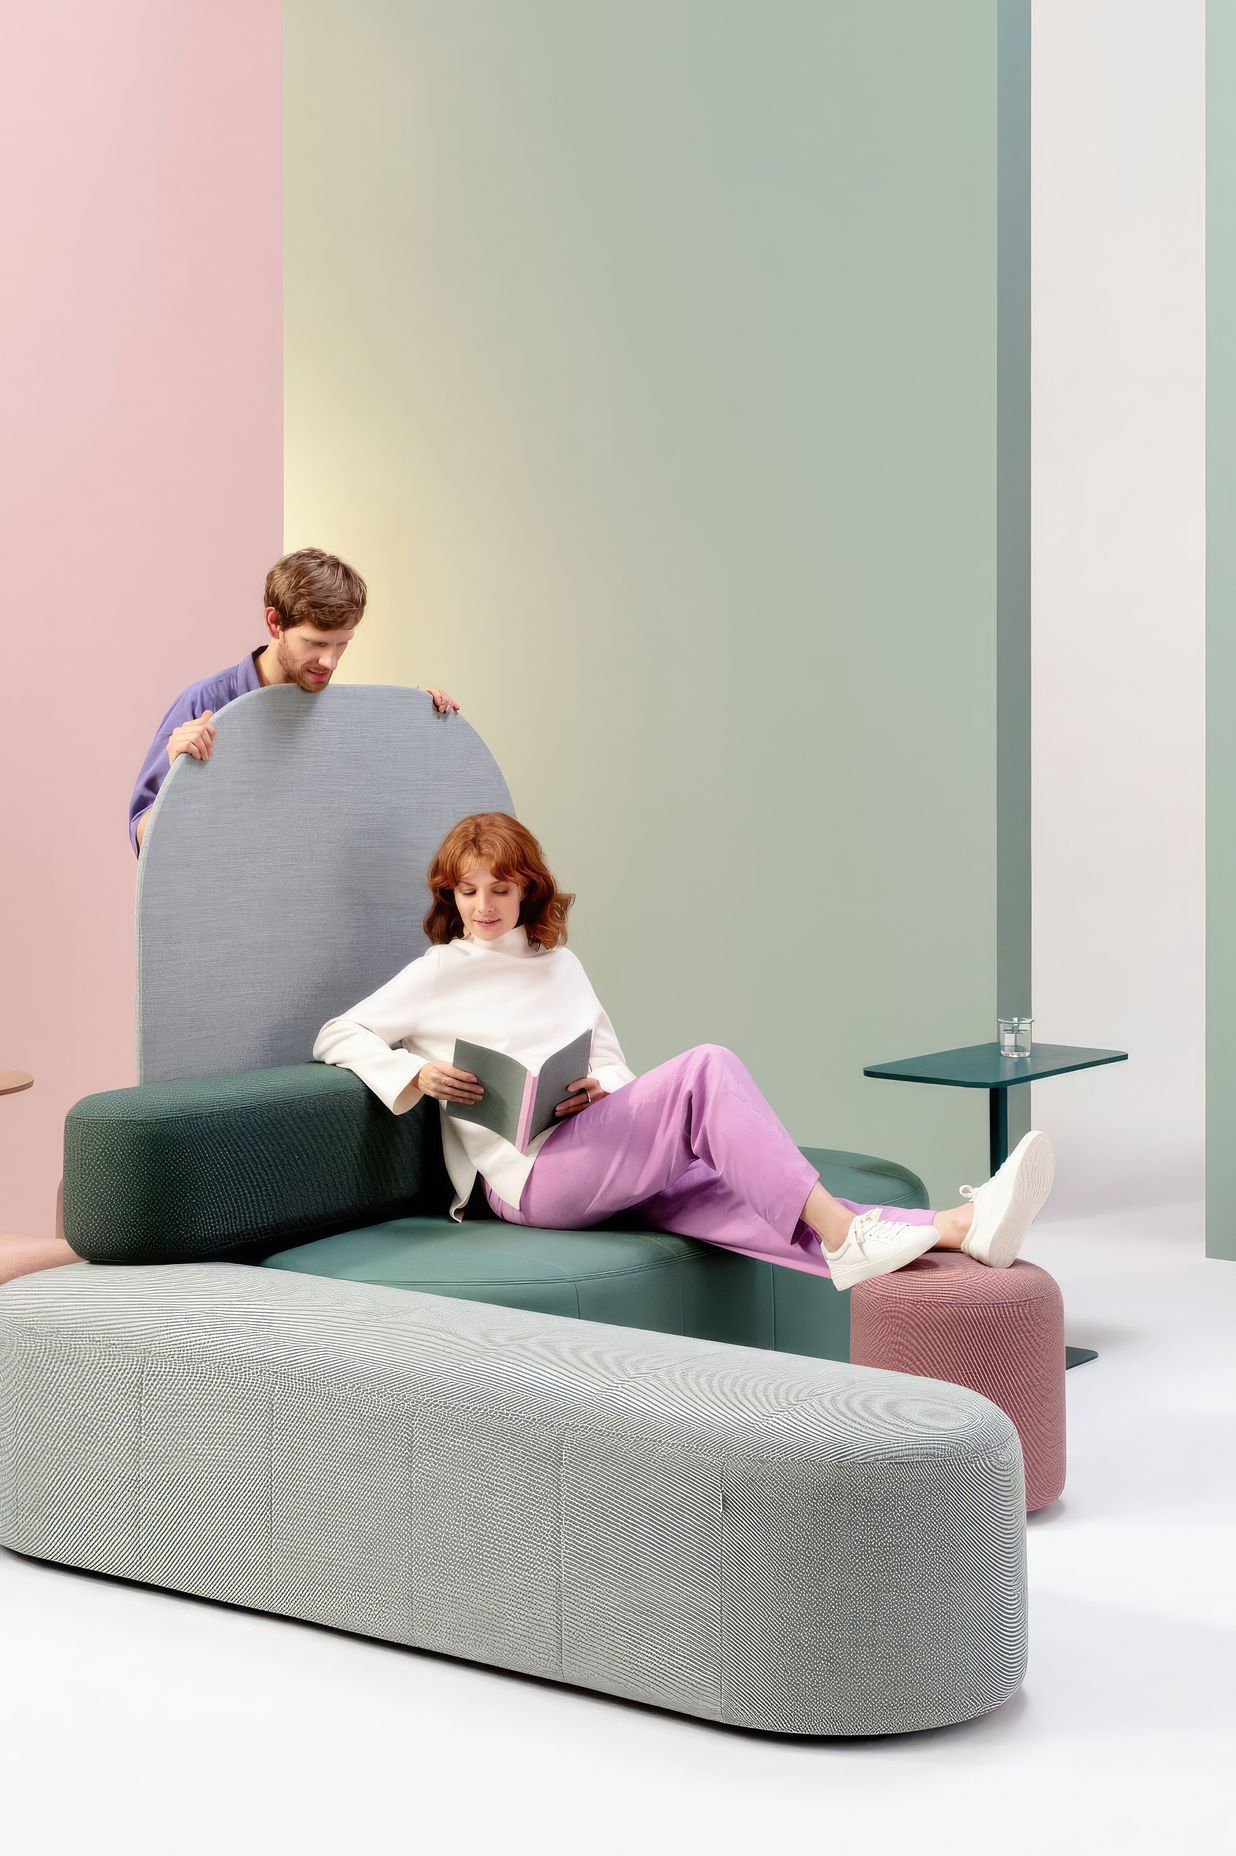 Revo was designed by Pearson &amp; Lloyd for Flokk brand Profim, combining circular thinking with playful design to create a lightweight and versatile workplace furniture system.